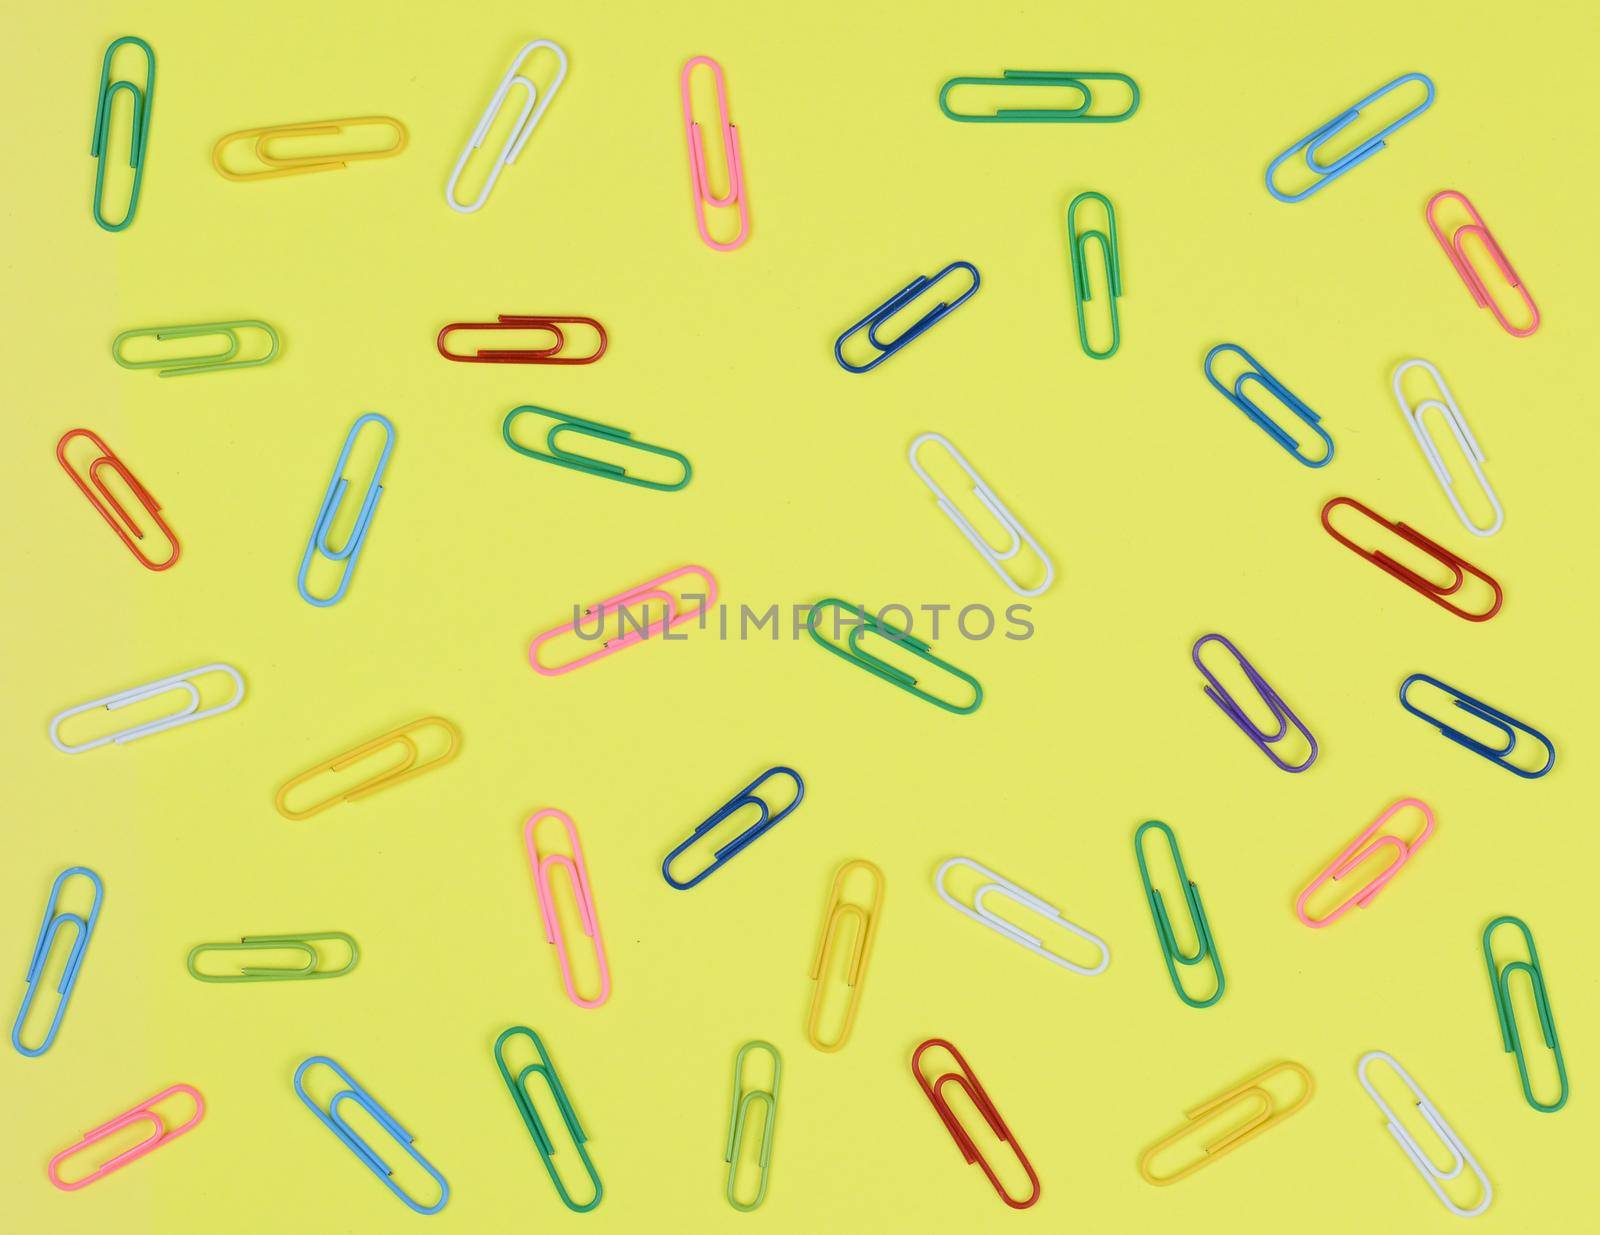 A group of multi-colored paper clips spread out on a yellow background.